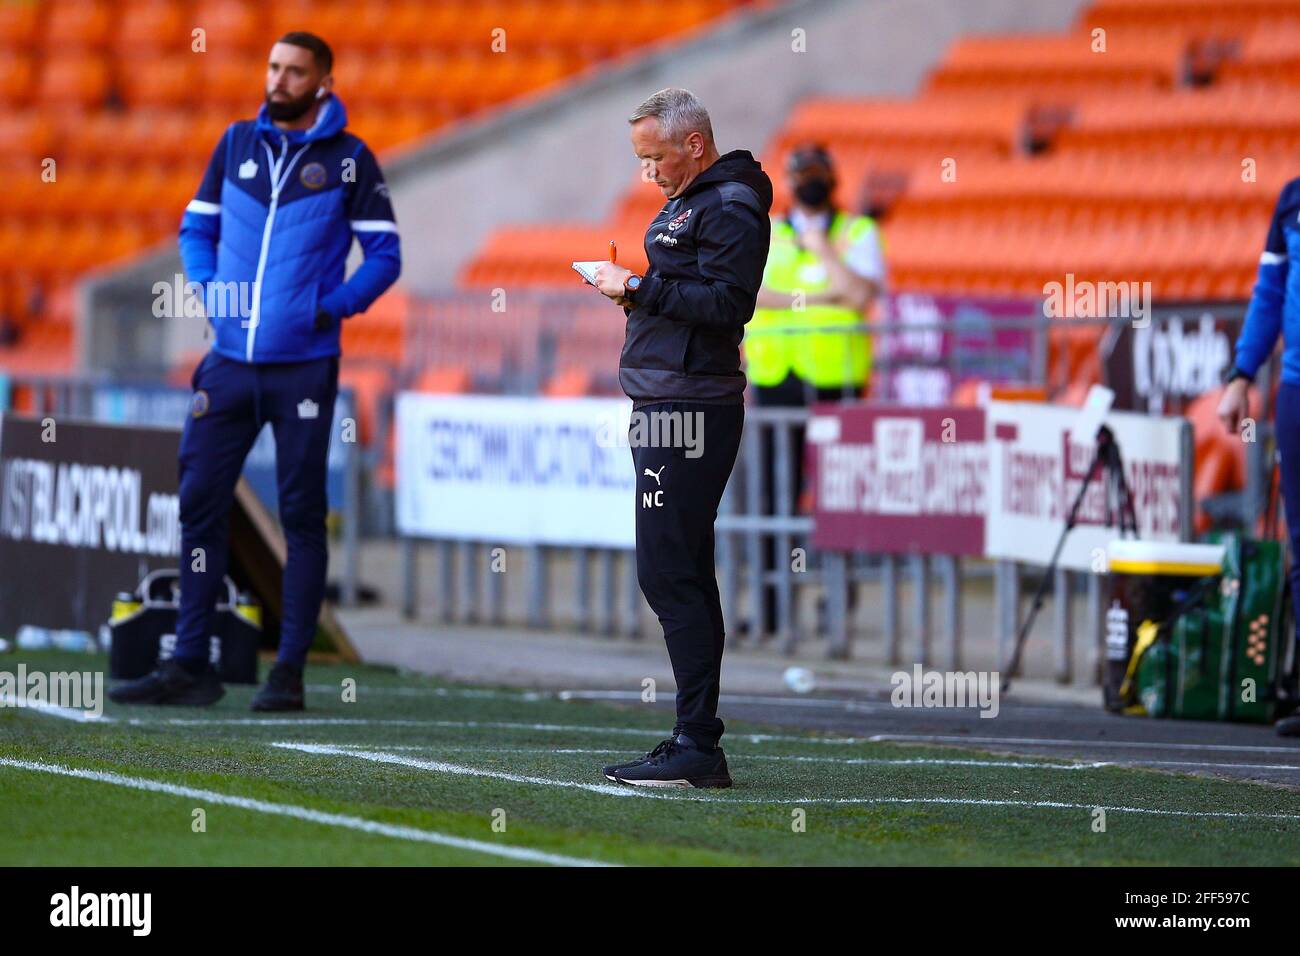 Bloomfield Road, Blackpool, UK. 24th Apr, 2021. Neil Critchley Manager of Blackpool taking notes during the game Blackpool v Shrewsbury Sky Bet League One 2020/21 Bloomfield Road, Blackpool, England - 24th April 2021 Credit: Arthur Haigh/Alamy Live News Stock Photo